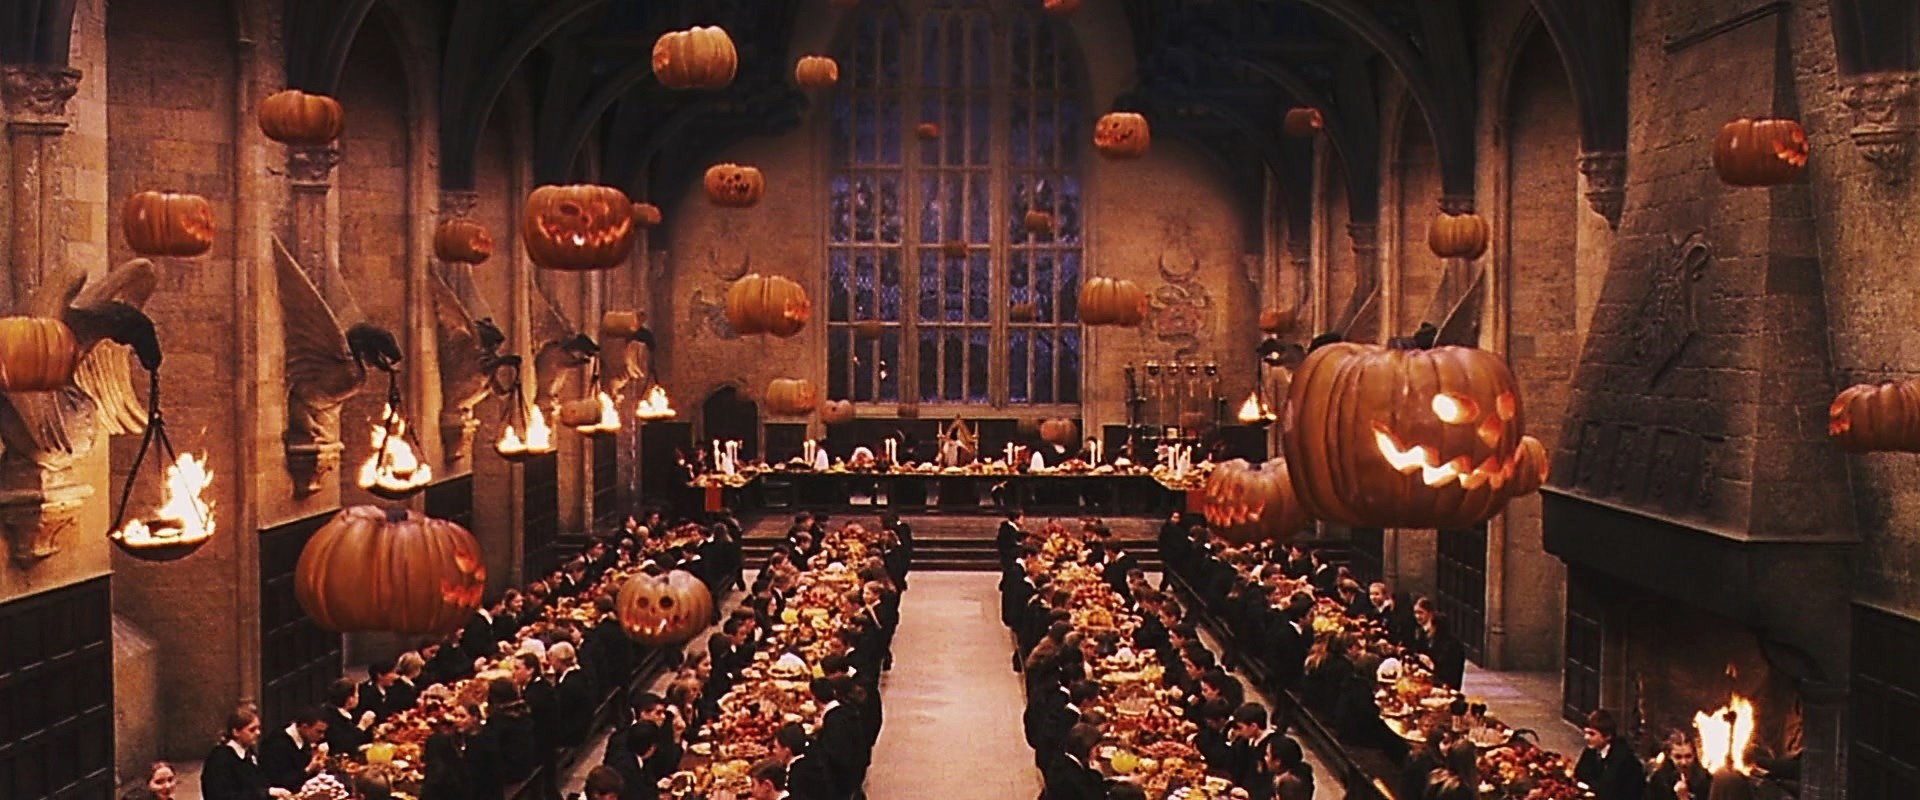    Harry Potter    fans can dinner in Hogwarts this Christmas 